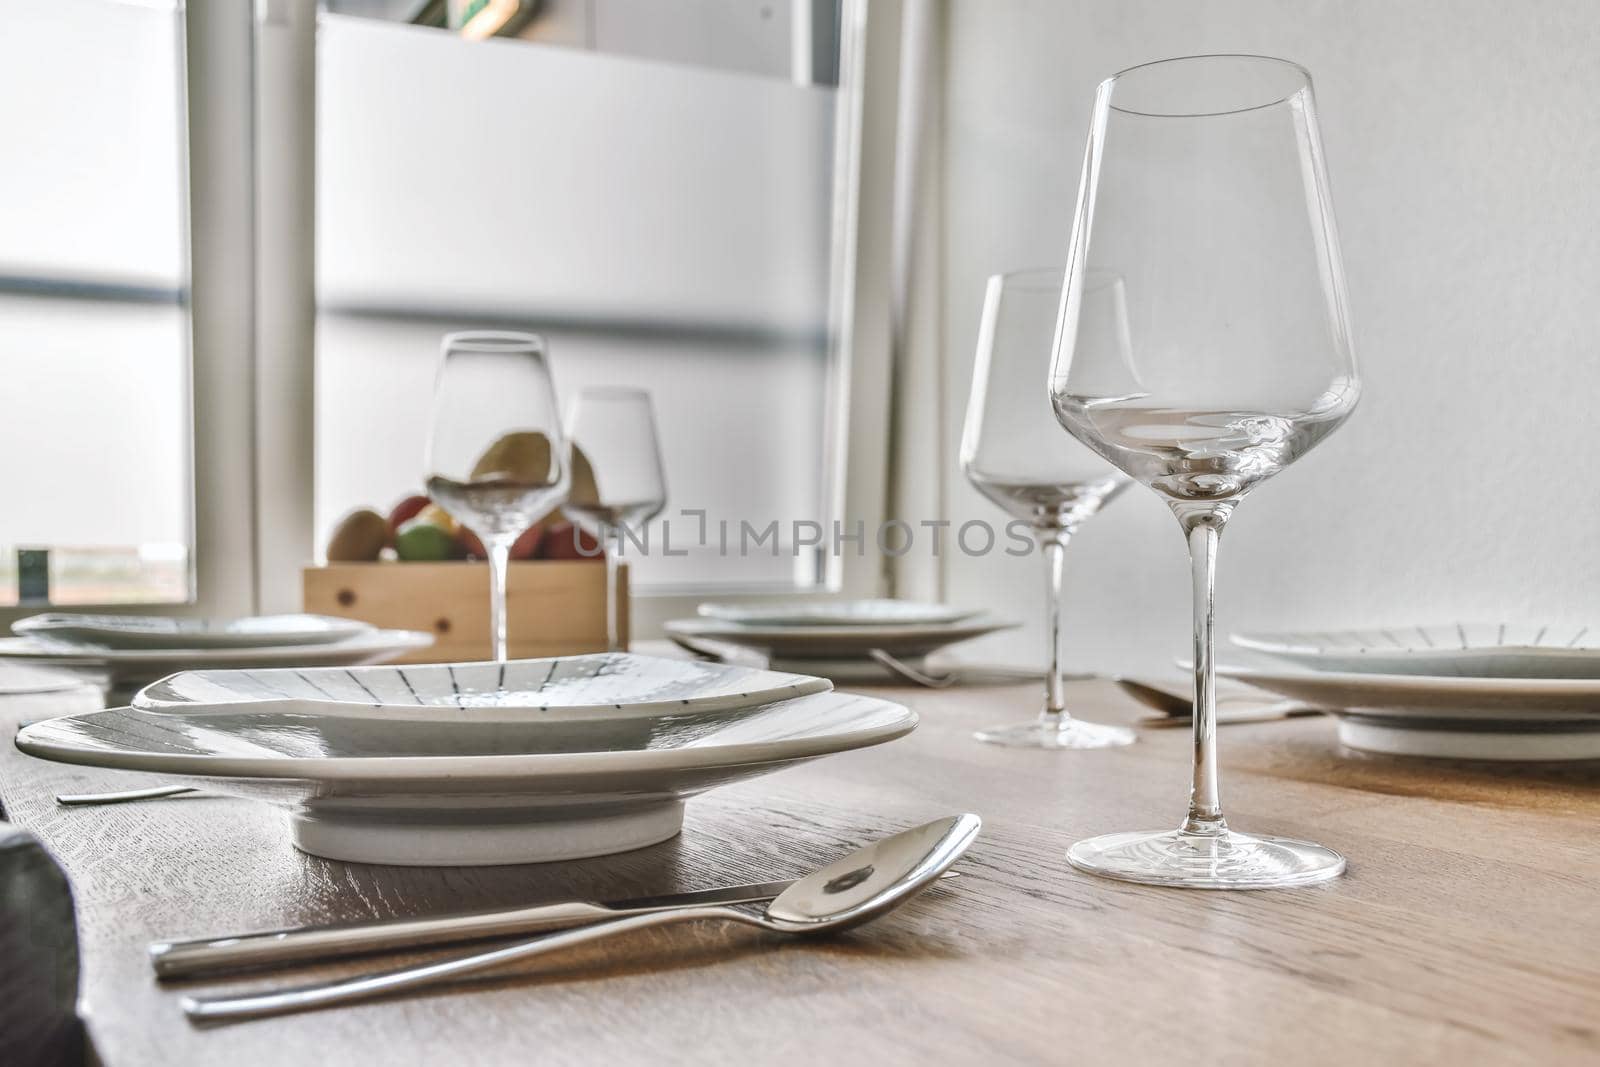 Beautifully served table in elegant dining room